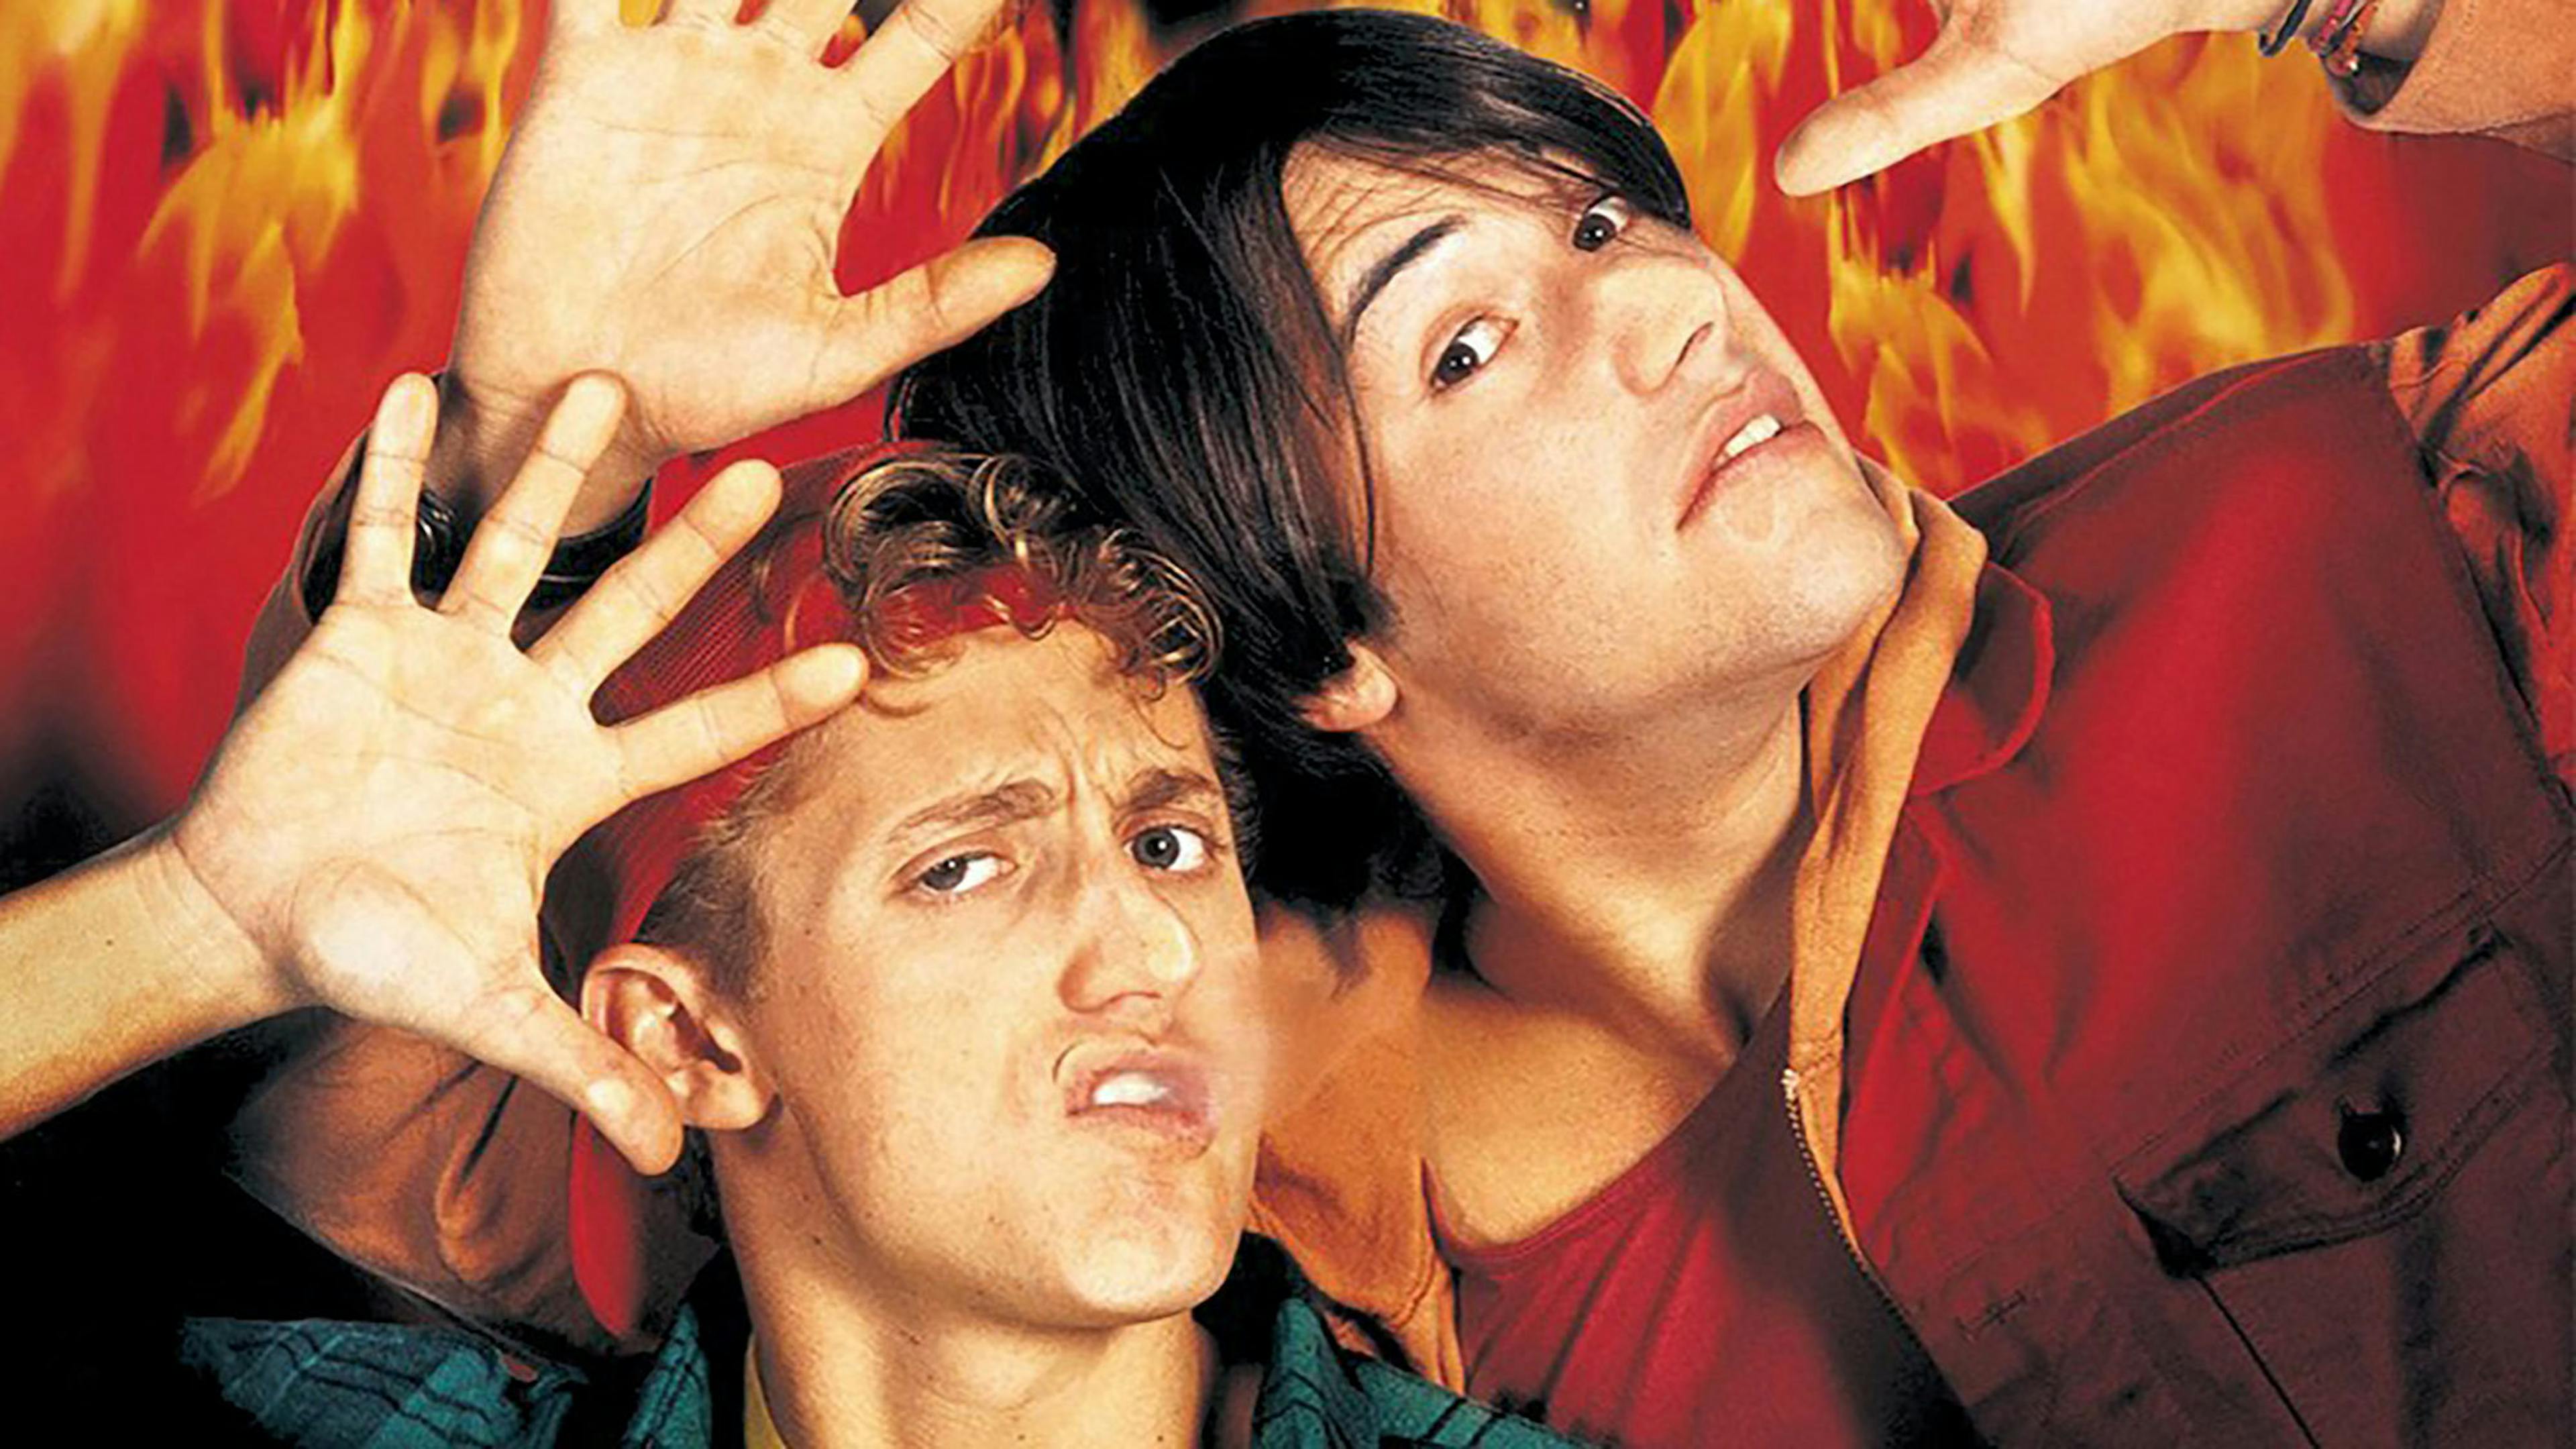 Here's Your First Look At The New Bill & Ted Movie